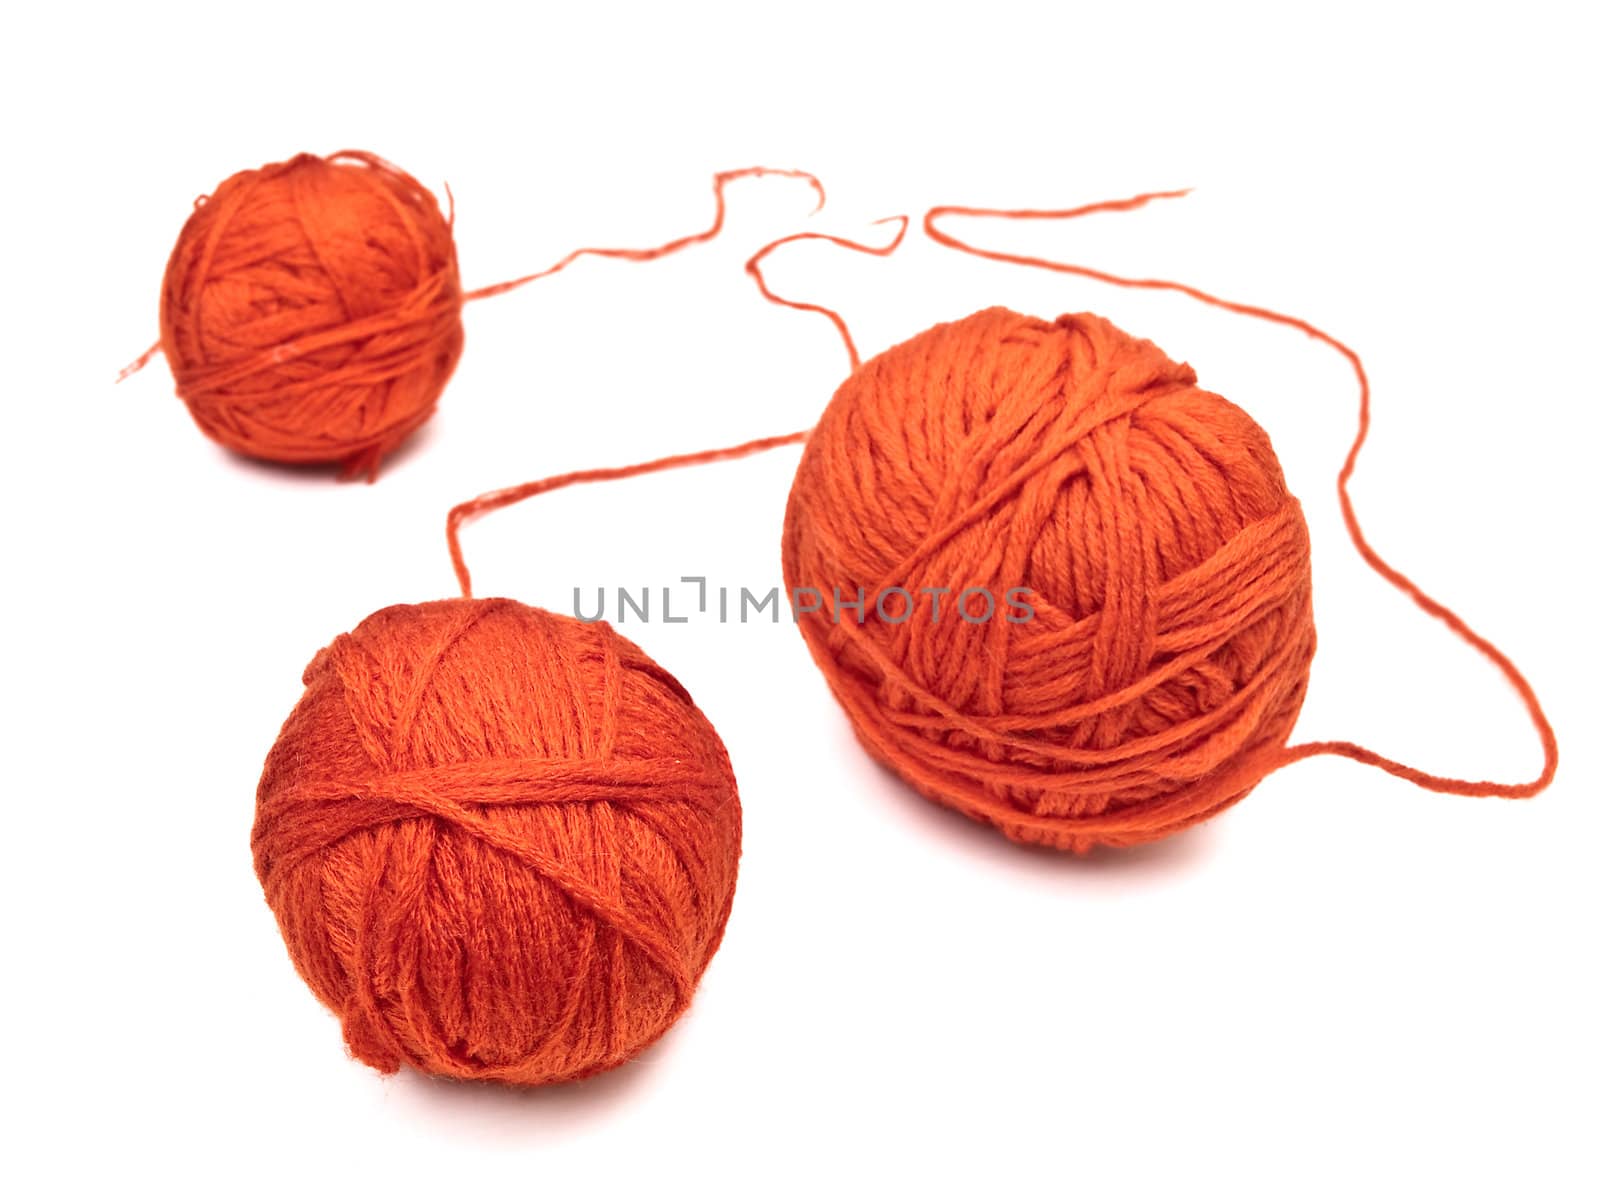 red yarns clews against the white background